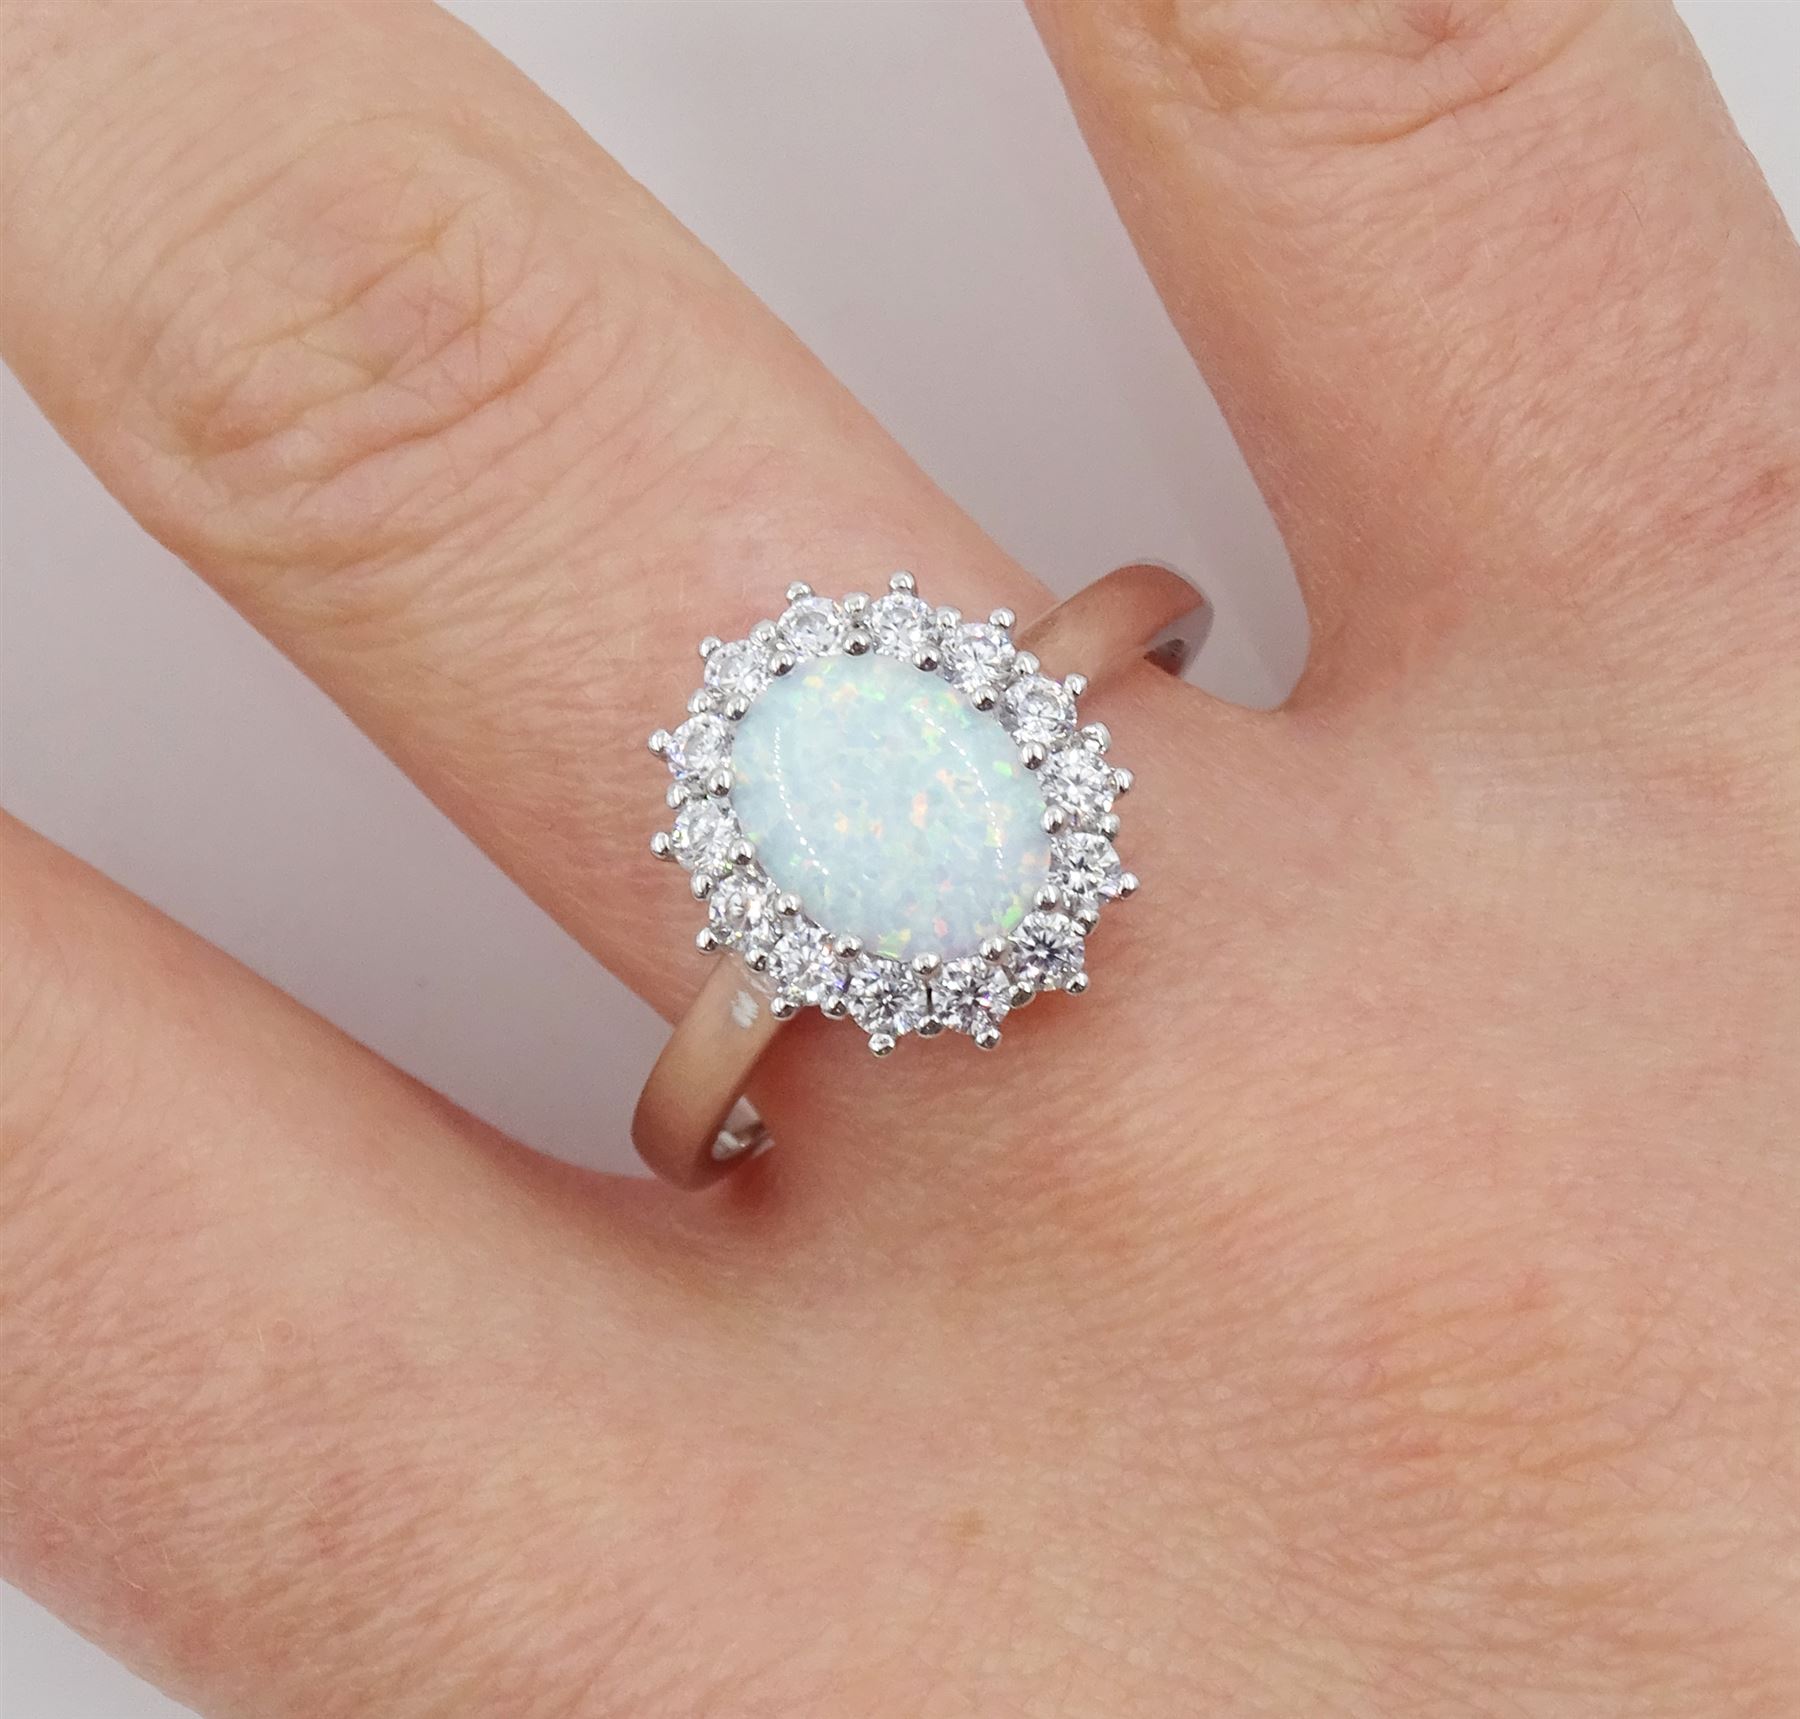 Silver opal and cubic zirconia cluster ring - Image 2 of 4